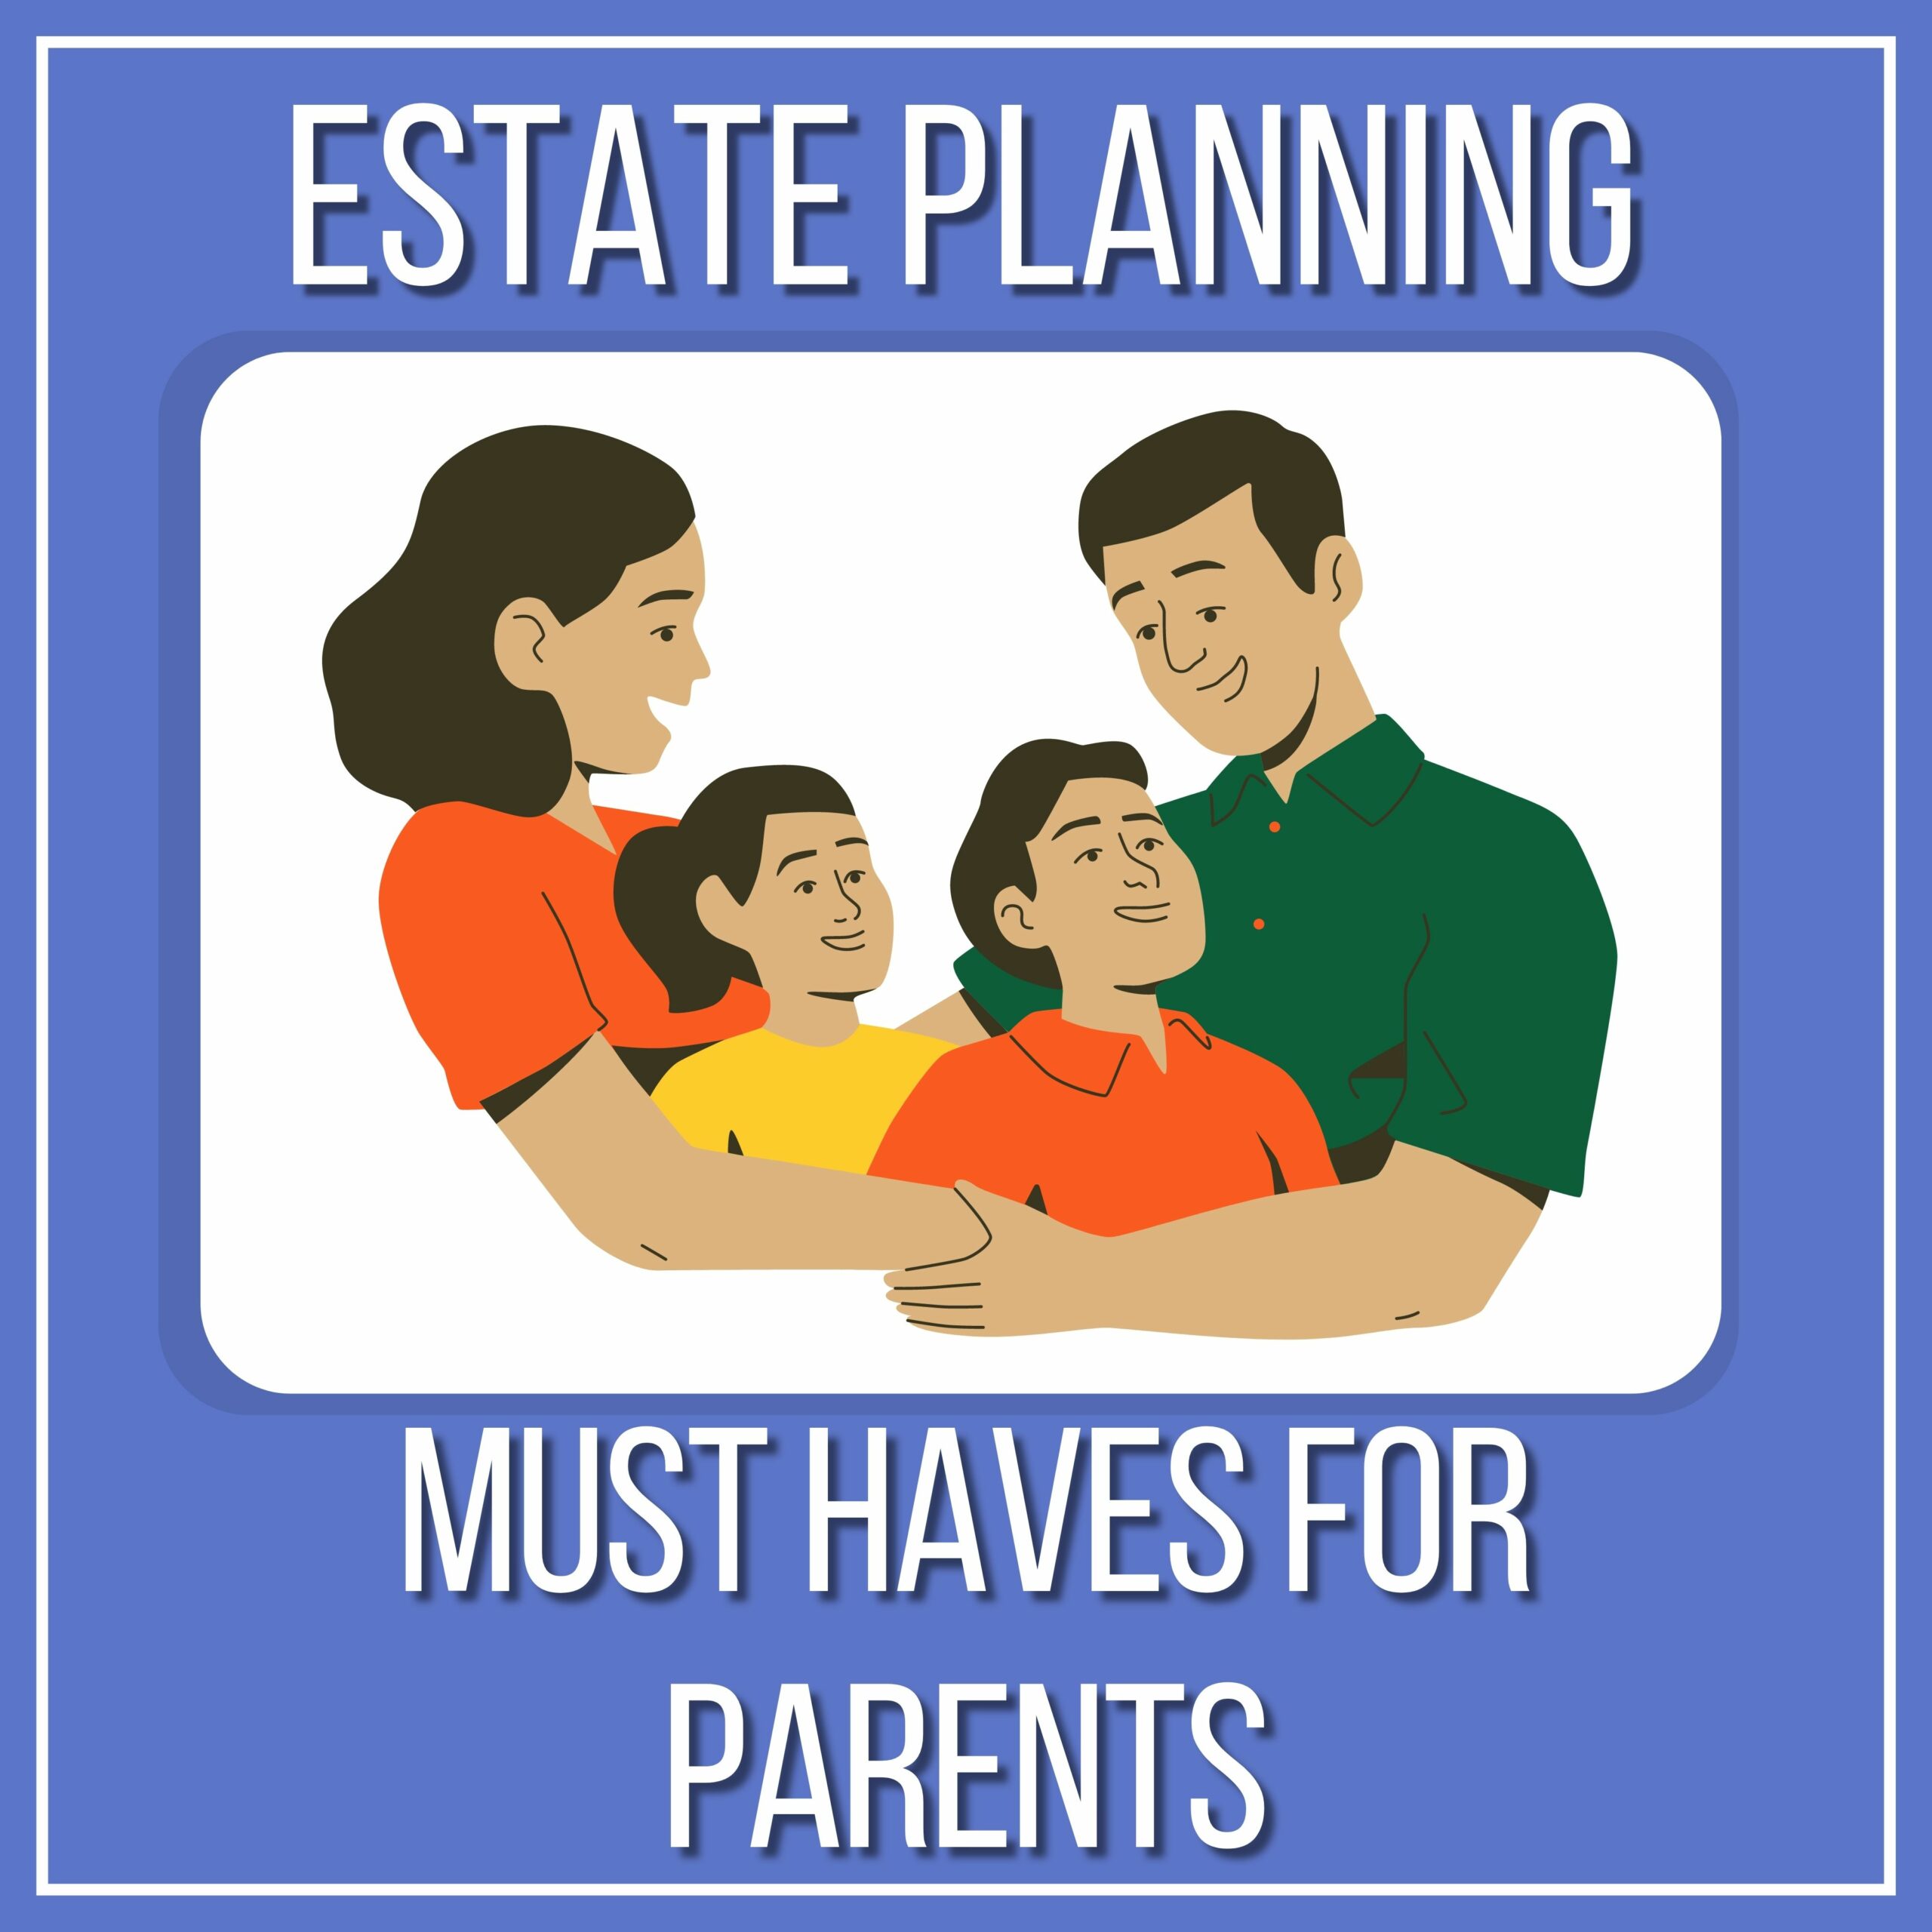 Picture of family hugging with the words "Estate Planning" above the picture, and the words "Must Haves for Parents" Beneath.